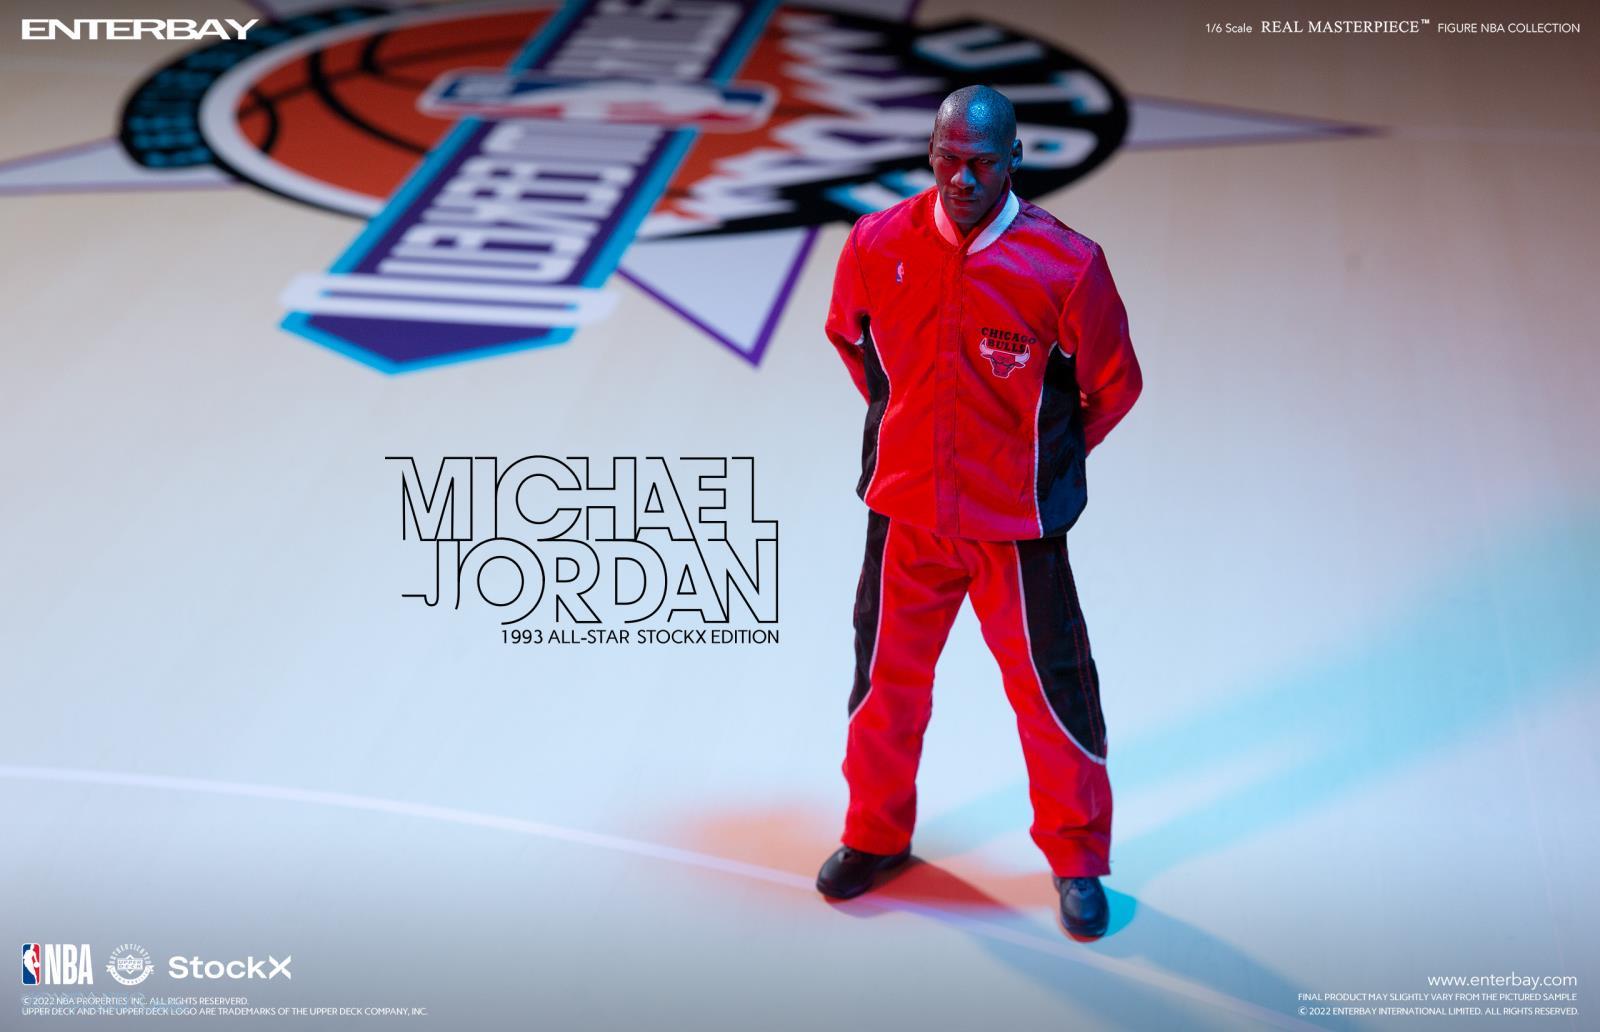 NEW PRODUCT: Enterbay - Real Masterpiece NBA Collection Michael Jordan All Star 1993 Edition 0678